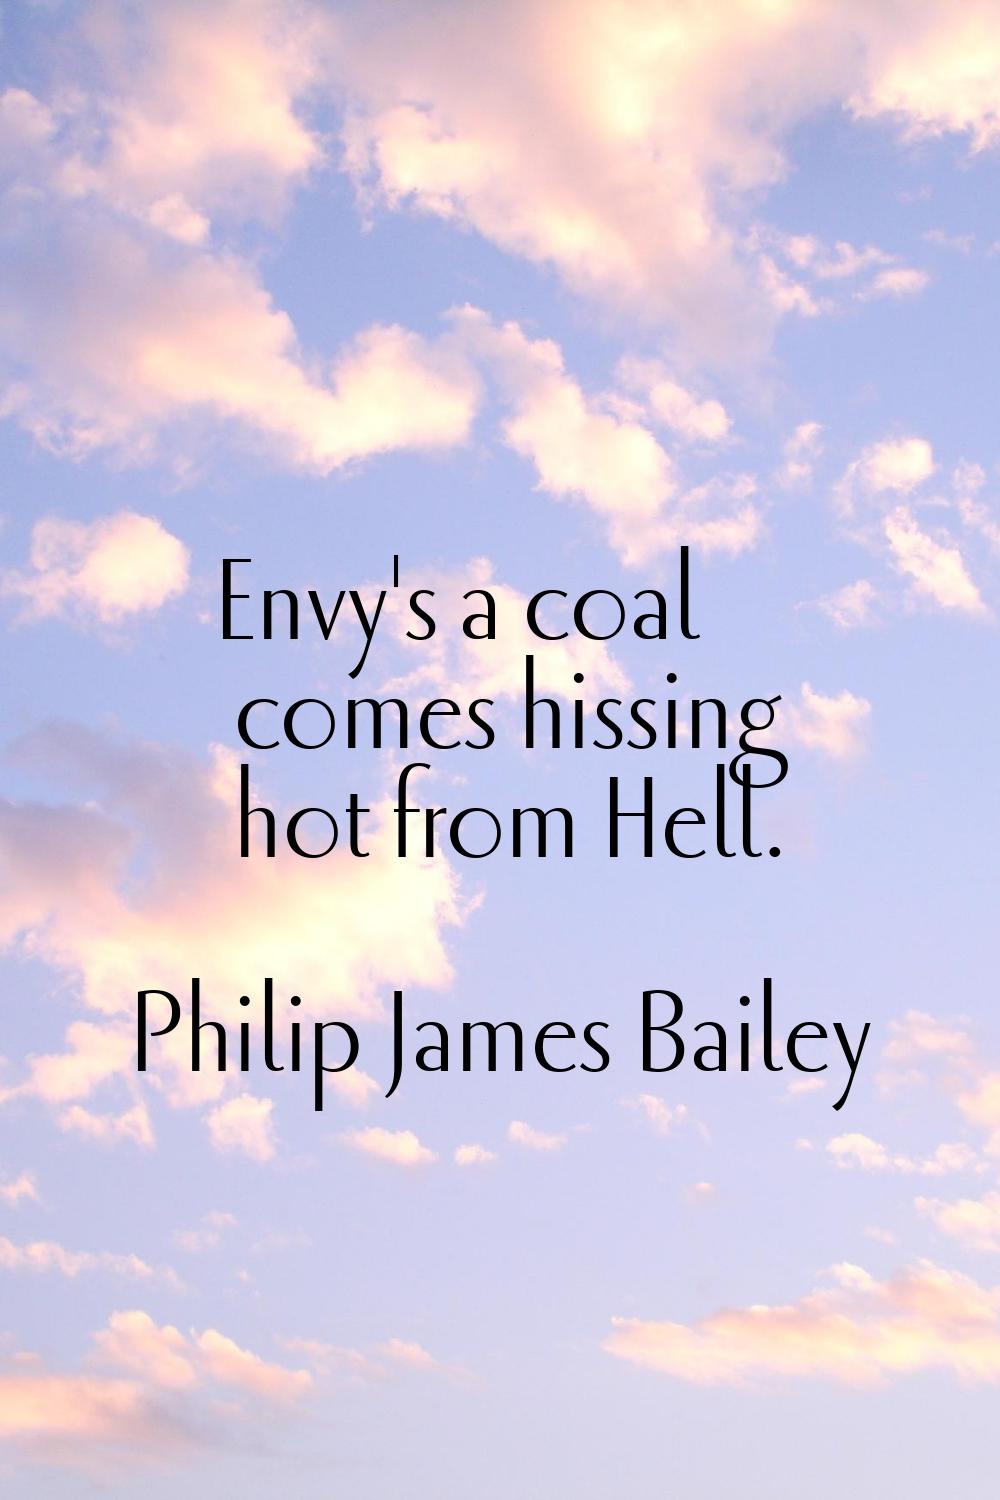 Envy's a coal comes hissing hot from Hell.